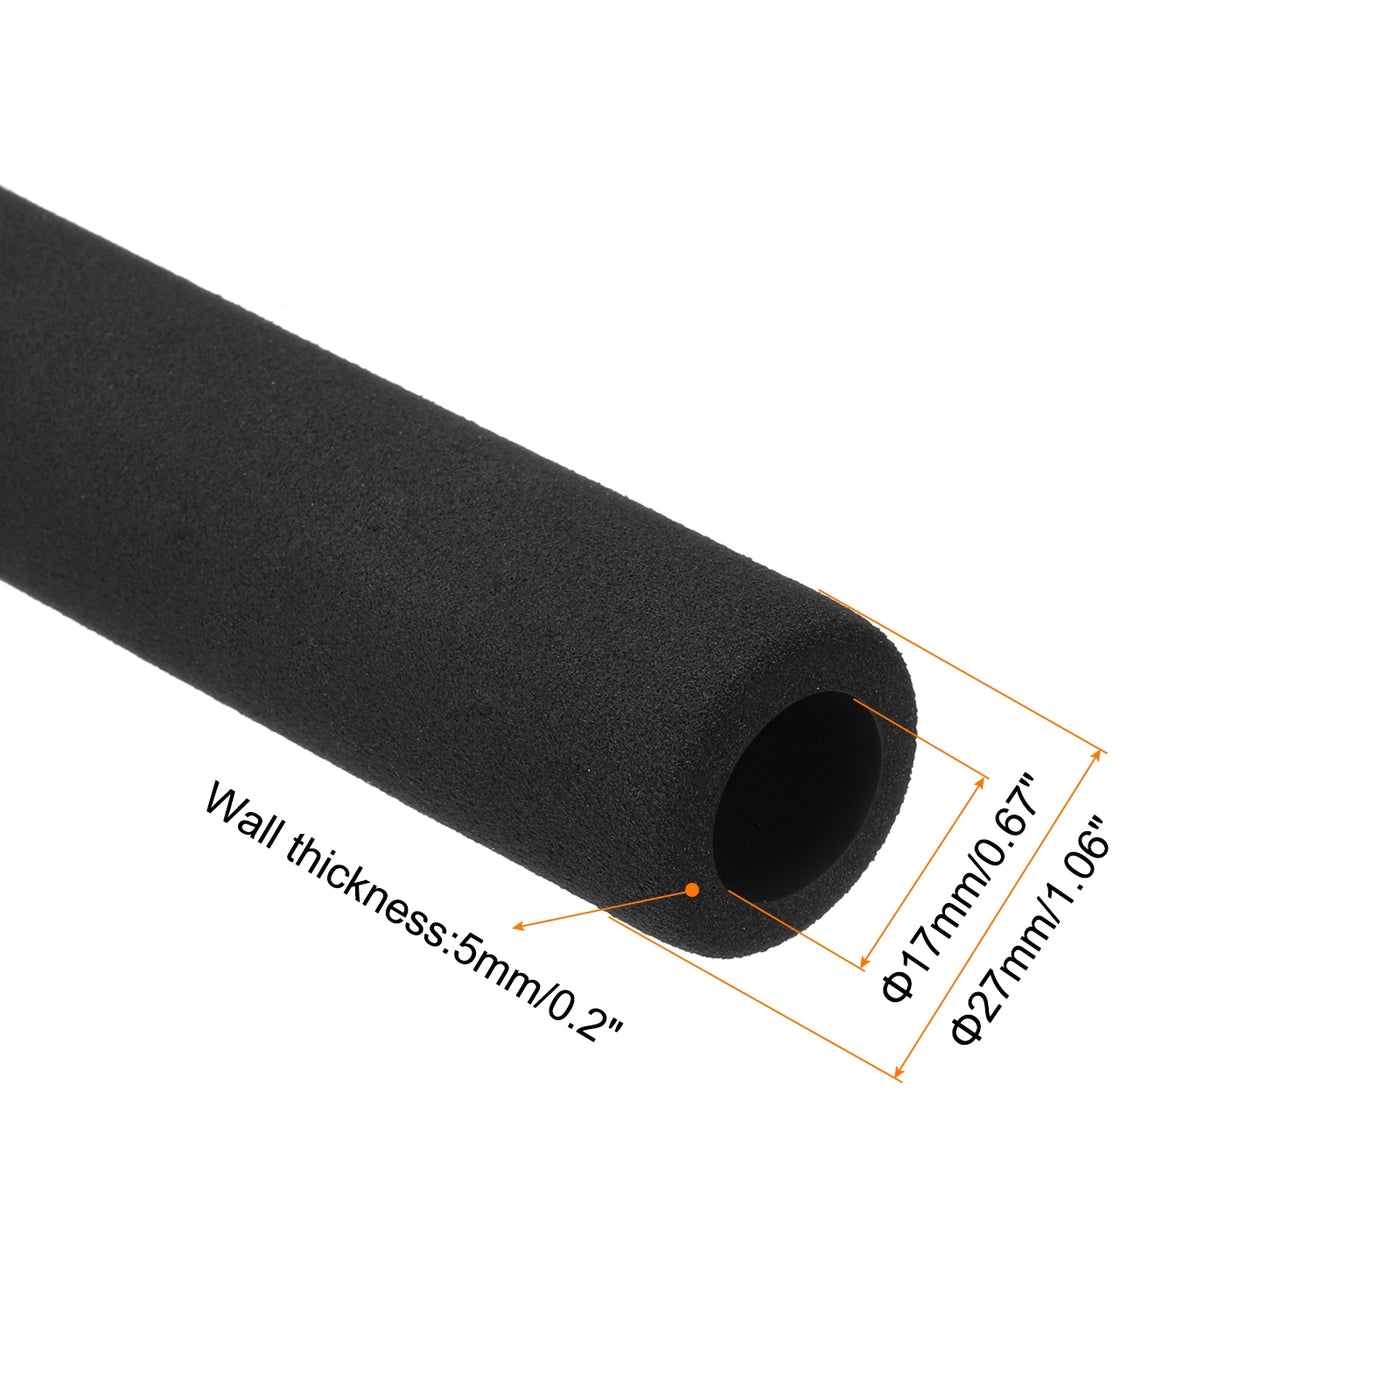 uxcell Uxcell Pipe Insulation Tube Foam Tubing for Handle Grip Support 17mm ID 27mm OD 116mm Length Heat Preservation Black